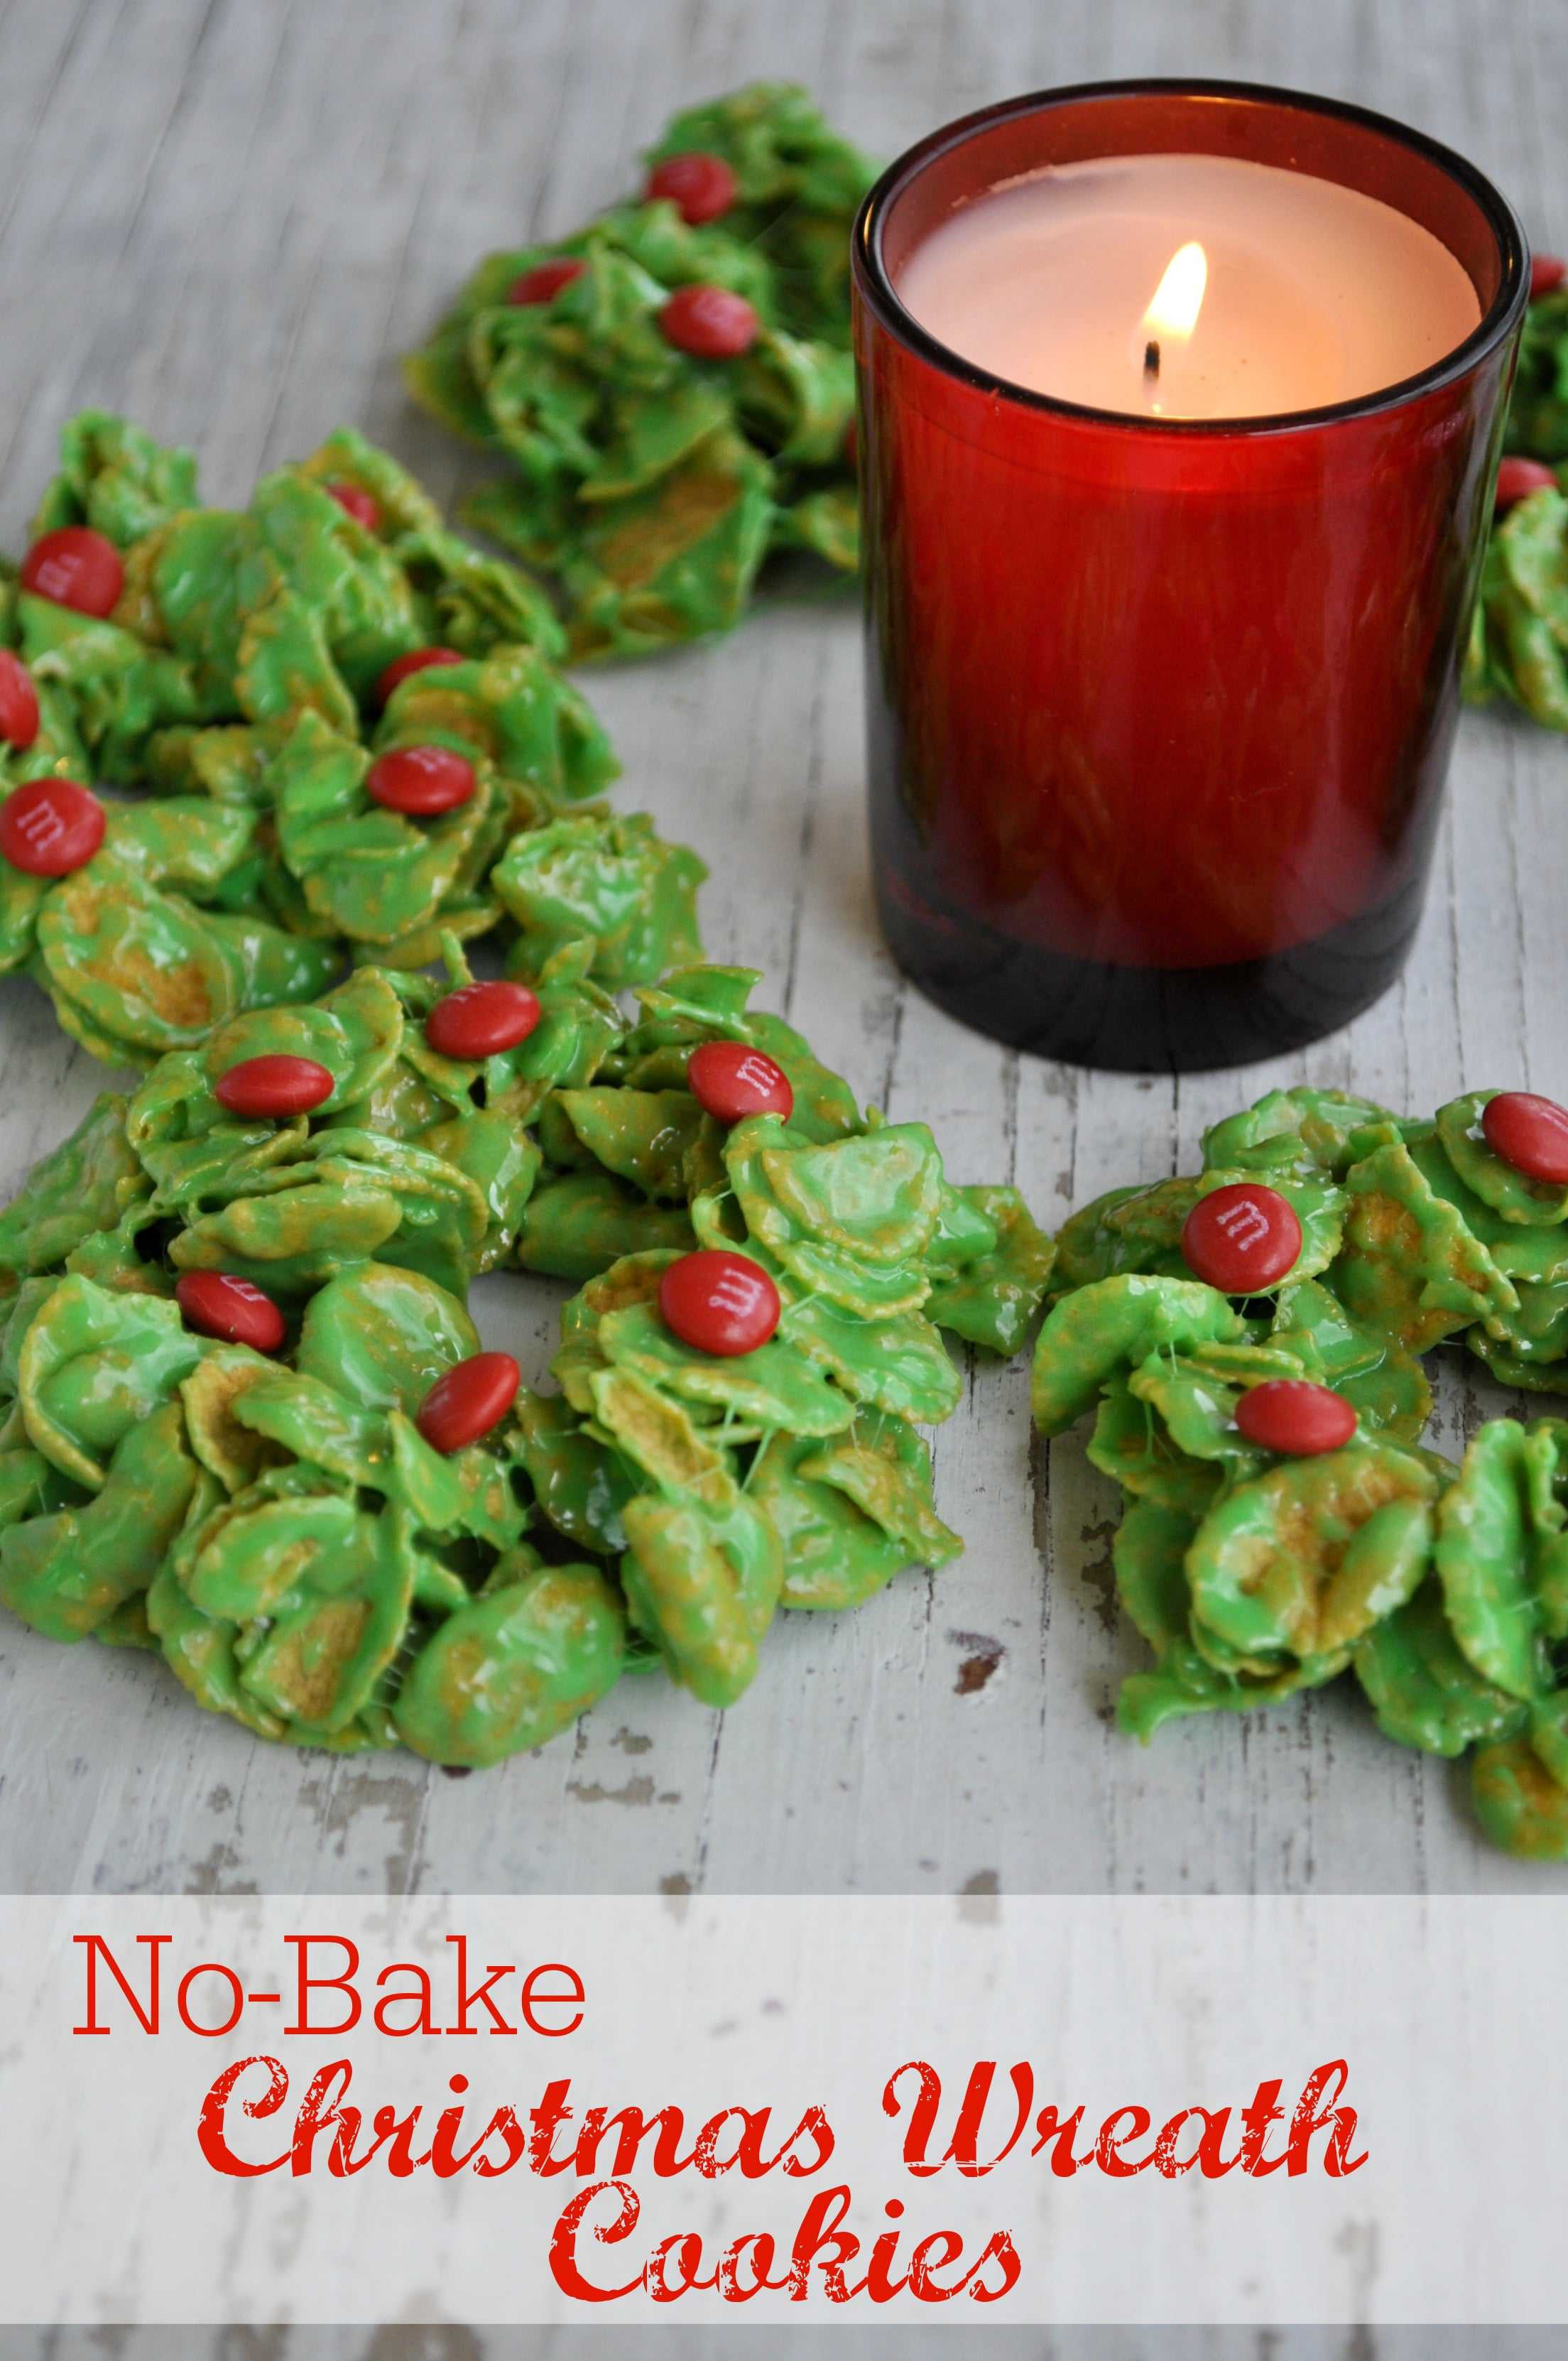 No Bake Christmas Wreath Cookies
 Holiday Cookies with M&M s Can s The Seasoned Mom